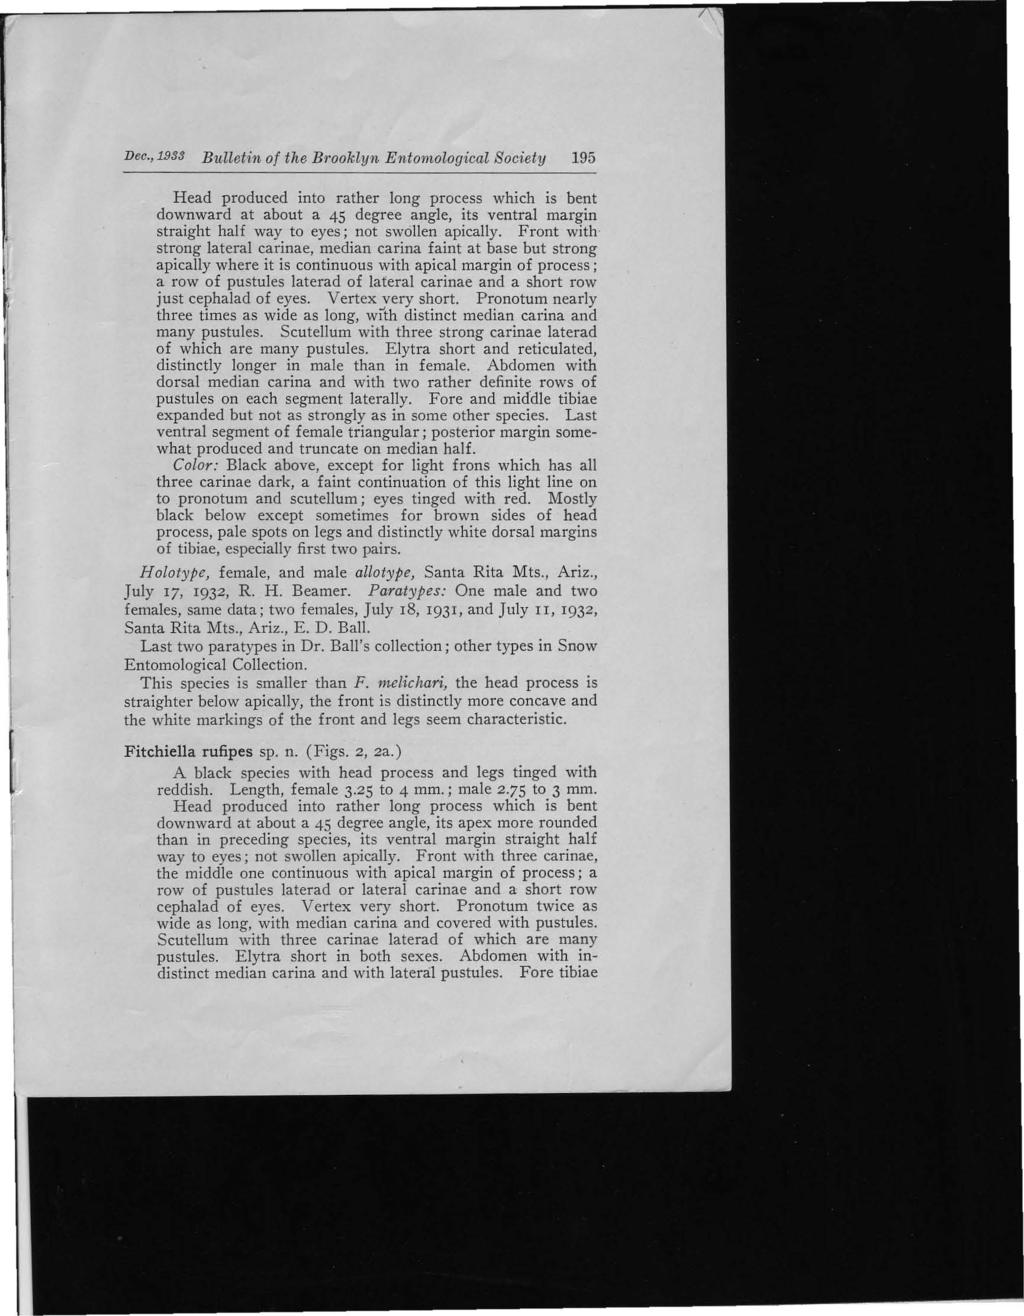 Dec., 1933 Bulletin of the Brooklyn Entomological Society 195 Head produced into rather long process which is bent downward at about a 45 degree angle, its ventral margin straight half way to eyes;